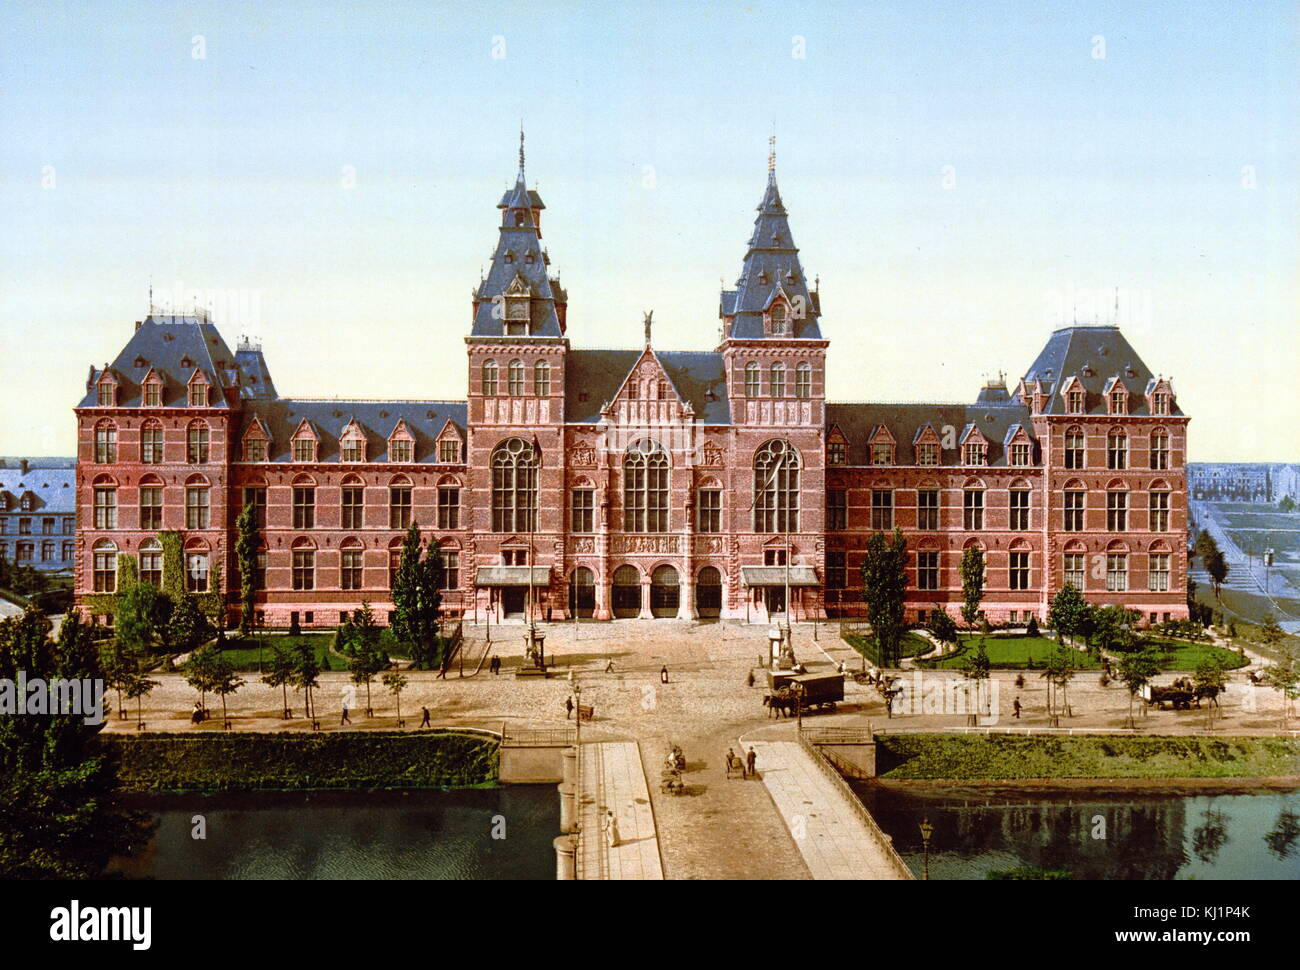 photomechanical print dated to 1900, depicting the Rijksmuseum, Amsterdam; Holland. The Rijksmuseum is a Dutch national museum dedicated to arts and history in Amsterdam. The museum is located at the Museum Square in Amsterdam. The Rijksmuseum was founded in The Hague in 1800 and moved to Amsterdam in 1808. The current main building was designed by Pierre Cuypers and first opened its doors in 1885. Stock Photo